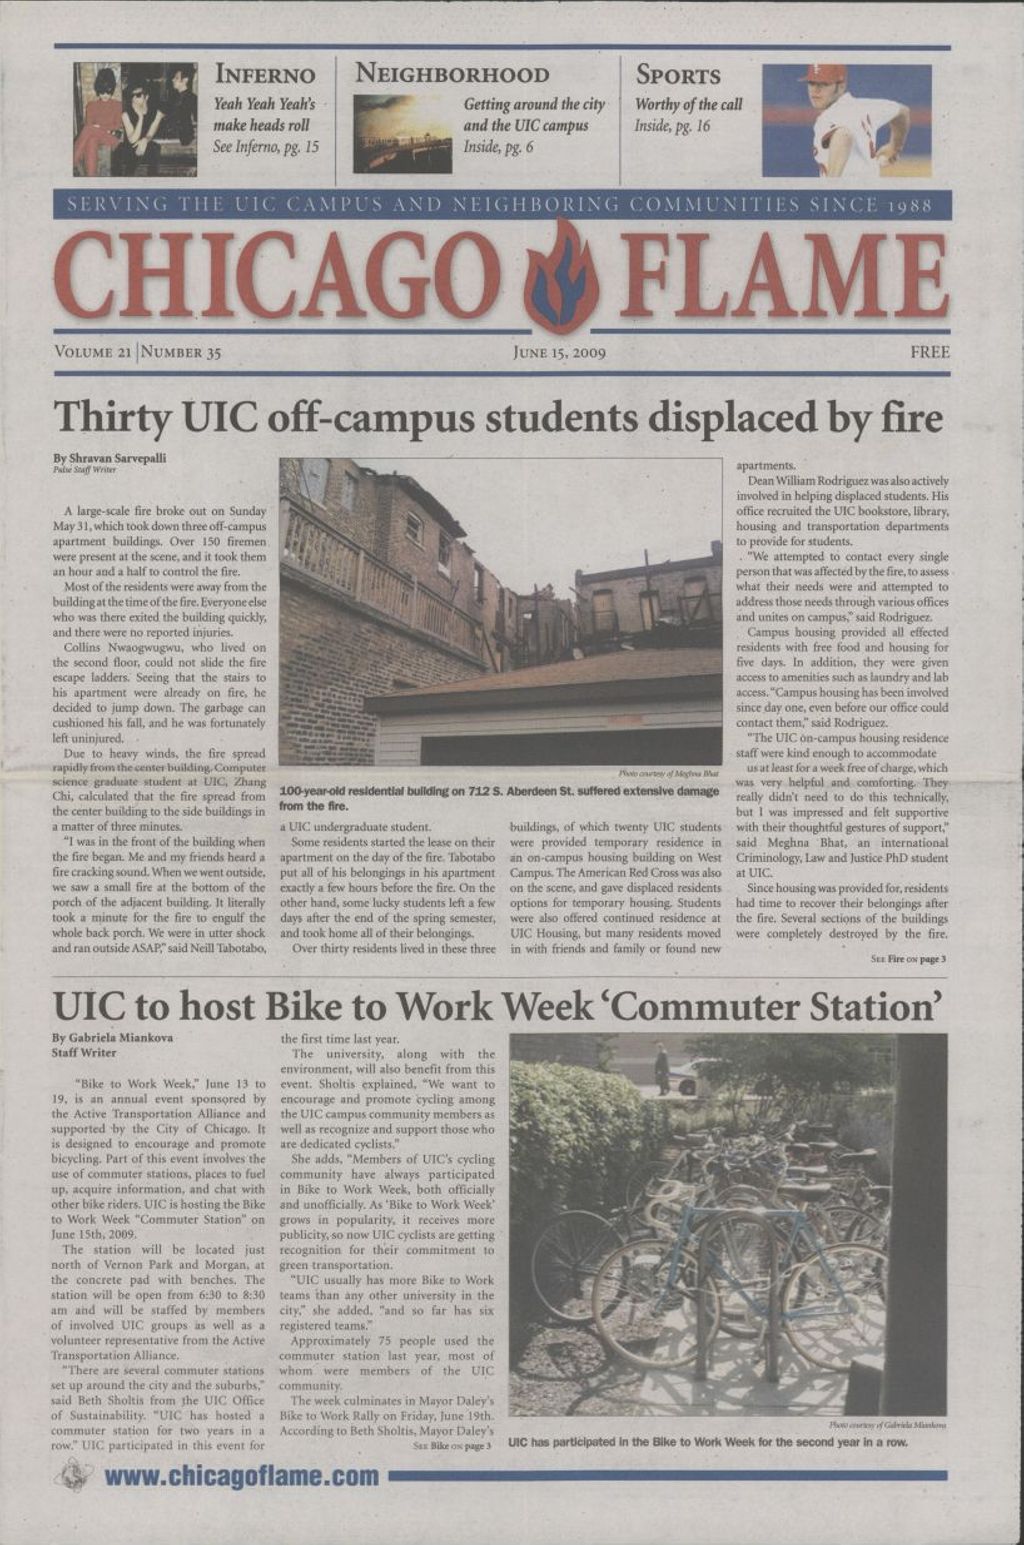 Chicago Flame (June 15, 2009)